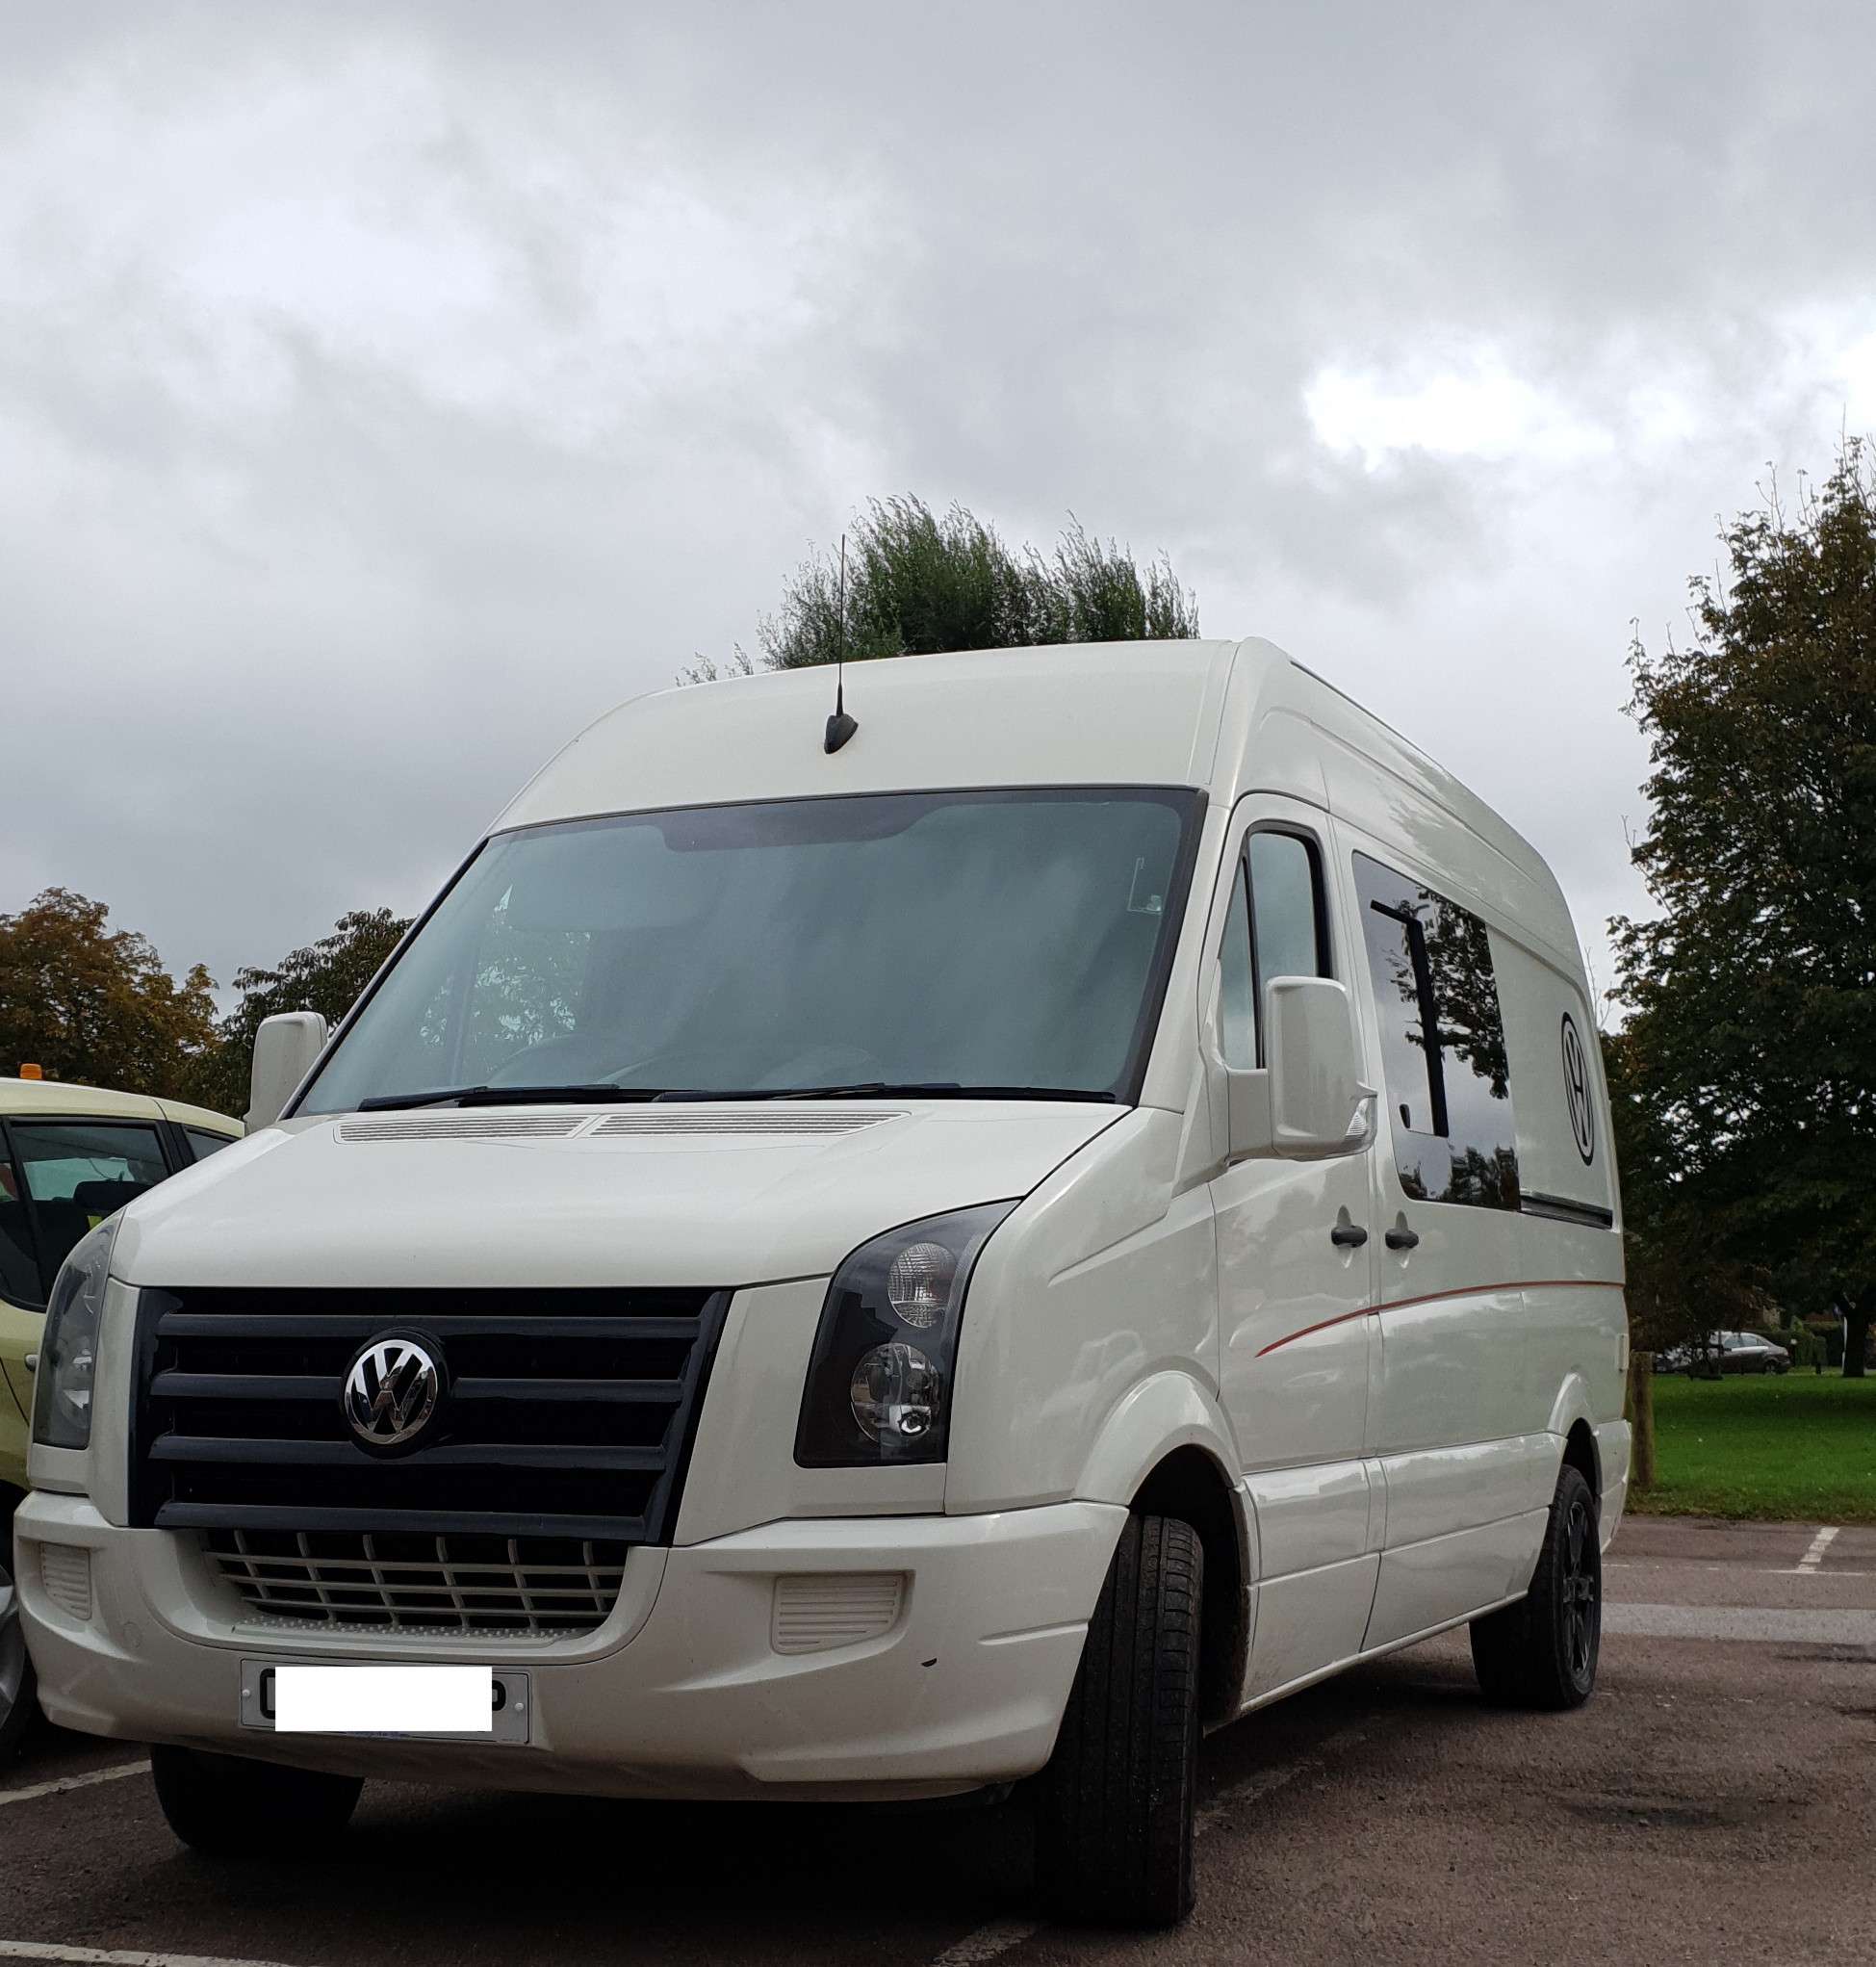 A VW Crafter Campervan called Crafter and for hire in High Wycombe, England